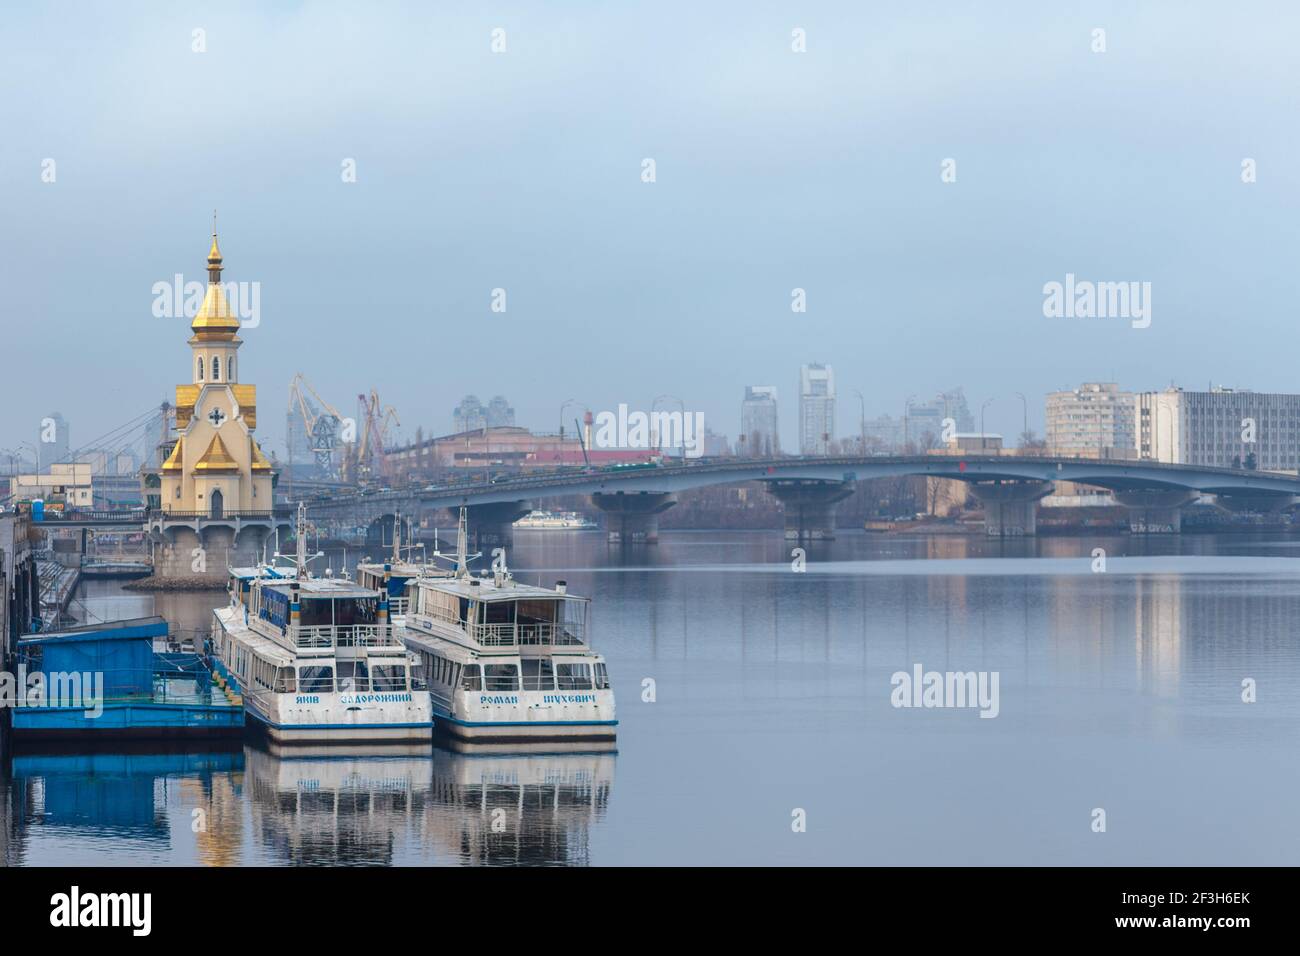 Ukraine, Kiev - January 9, 2020: Dnieper embankment and river station at Podil in Kiev. Moored pleasure boats for sightseeing excursions along the Dnieper River. Stock Photo